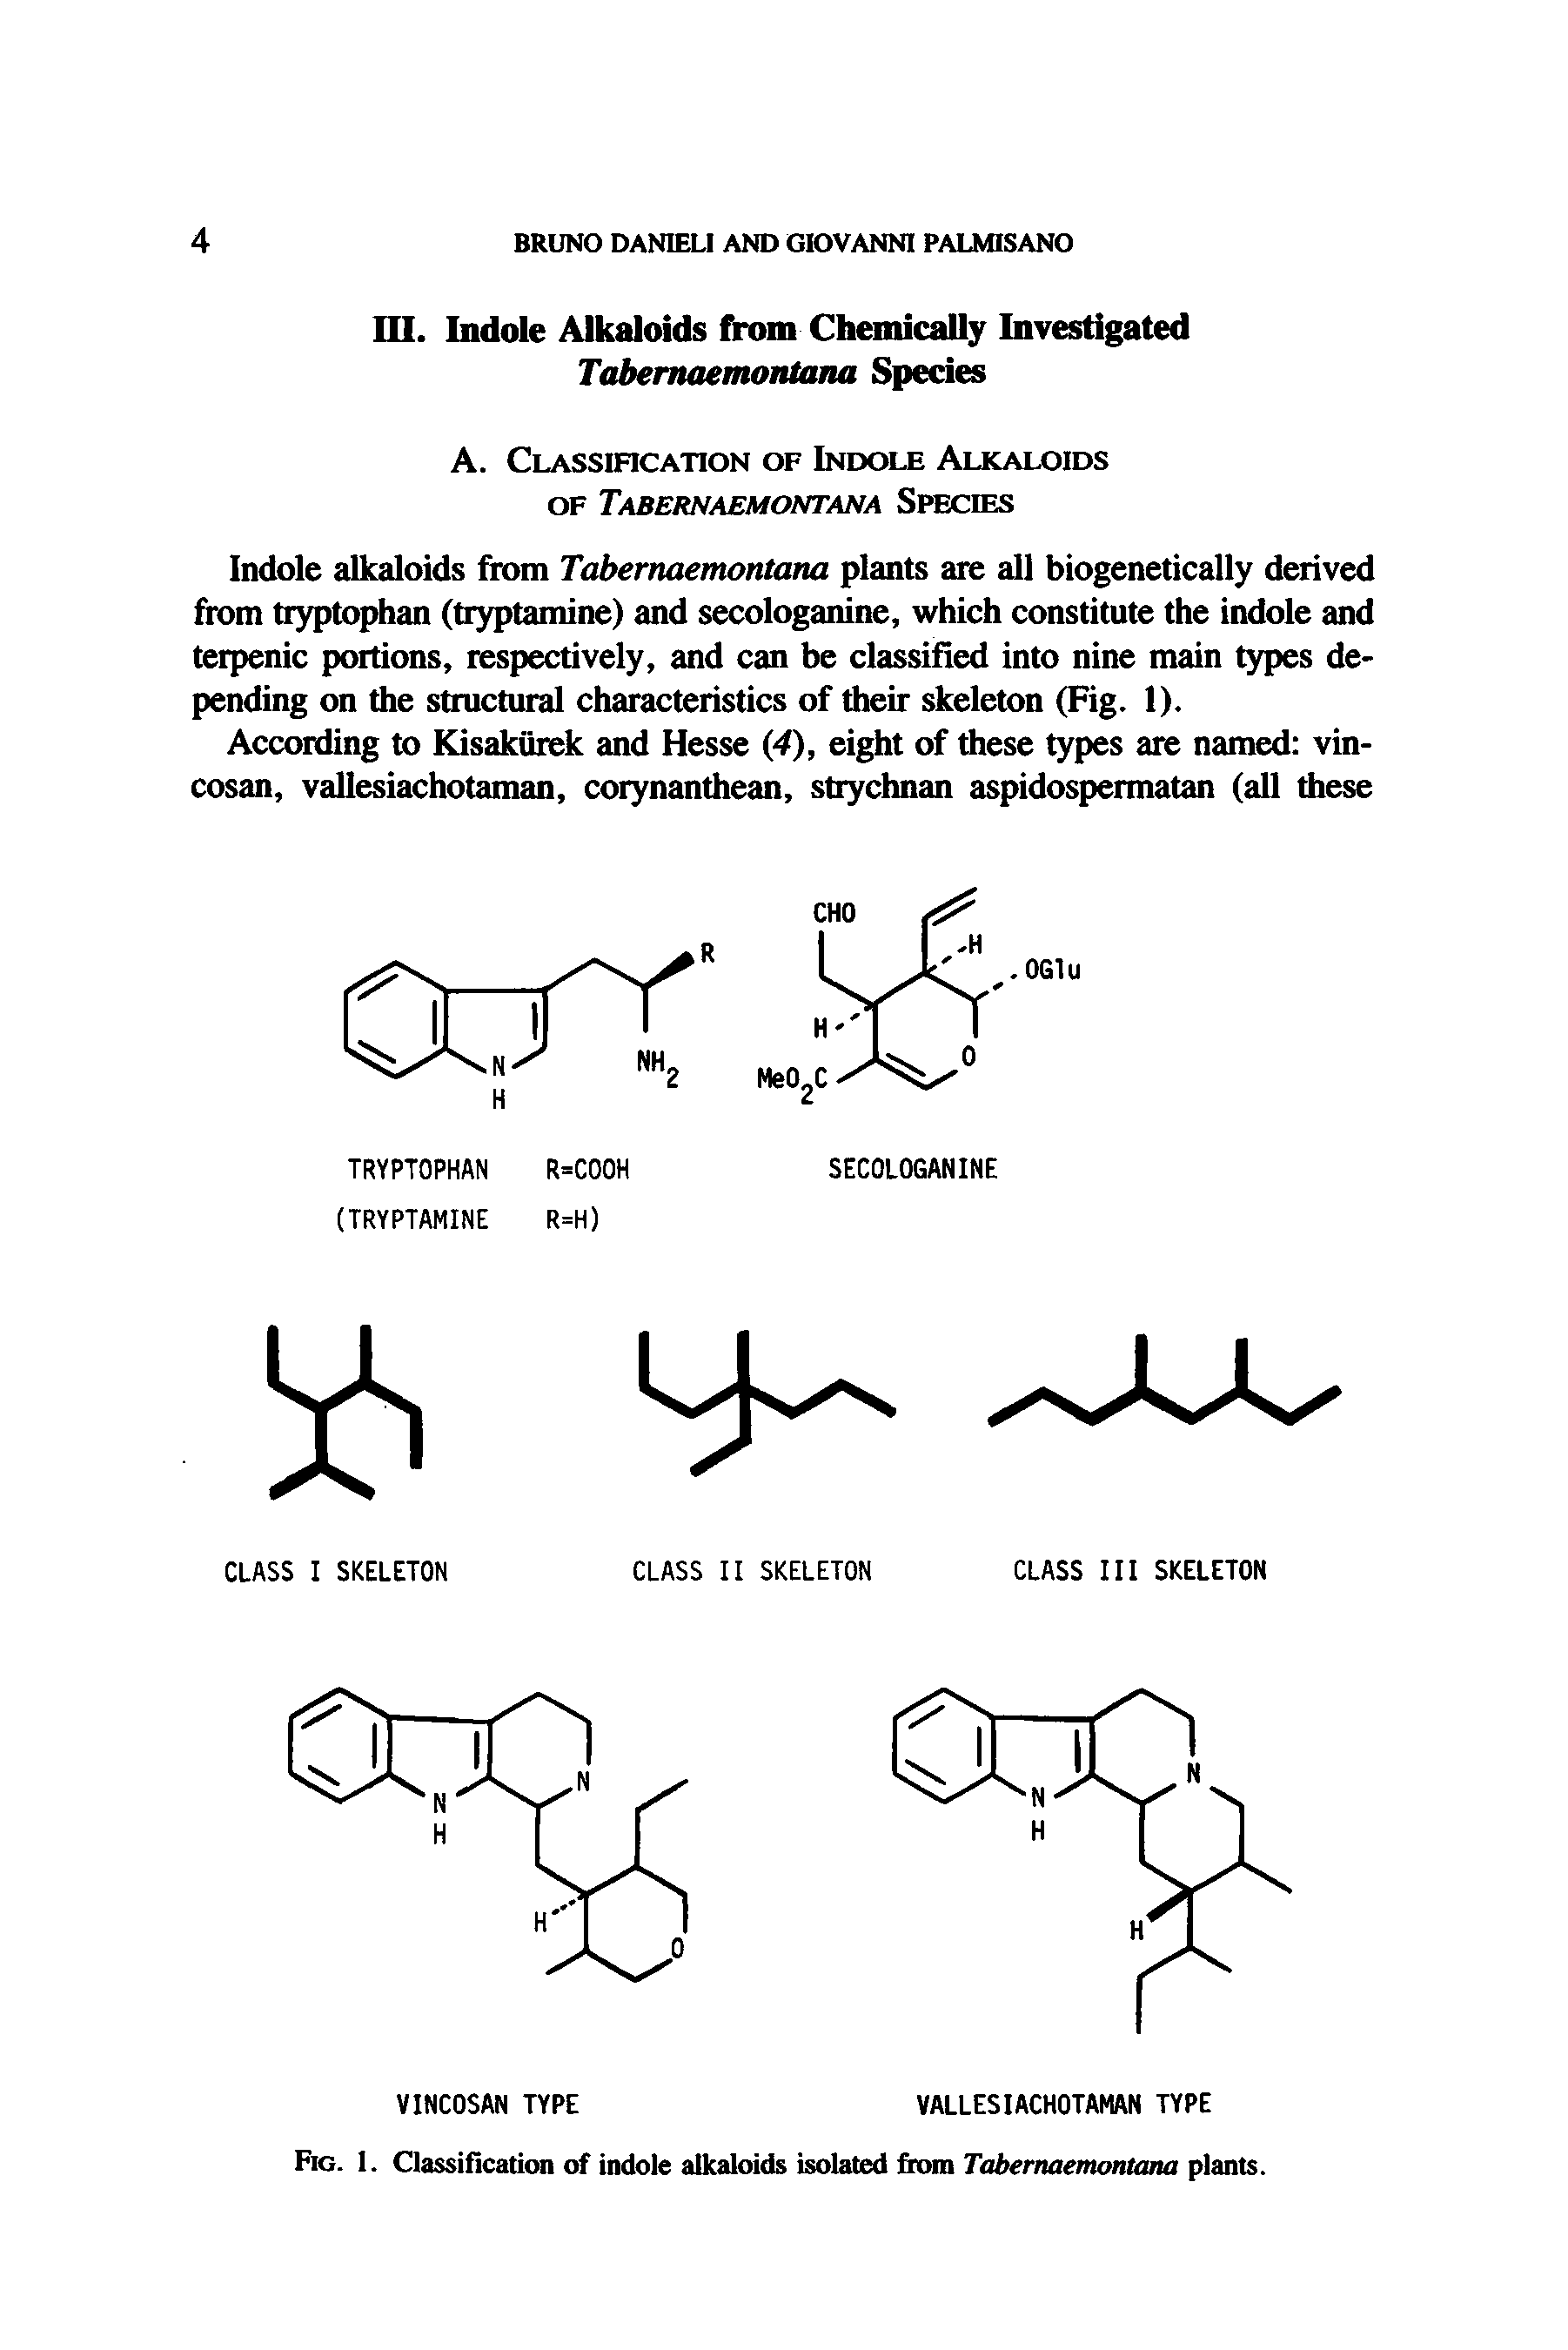 Fig. 1. Classification of indole alkaloids isolated from Tabernaemontana plants.